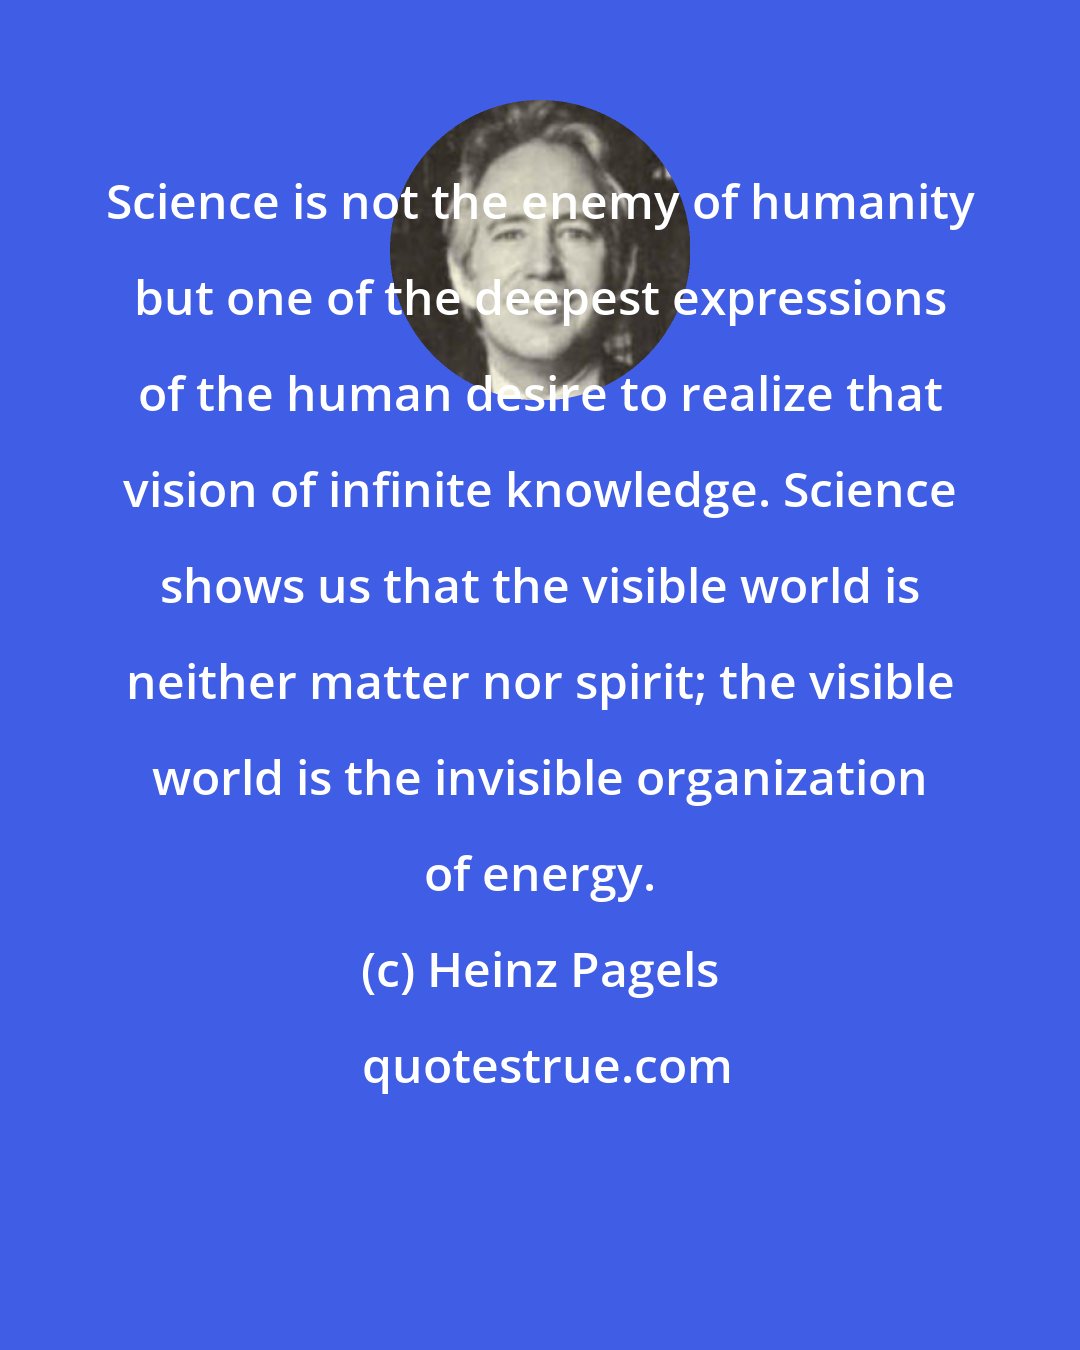 Heinz Pagels: Science is not the enemy of humanity but one of the deepest expressions of the human desire to realize that vision of infinite knowledge. Science shows us that the visible world is neither matter nor spirit; the visible world is the invisible organization of energy.